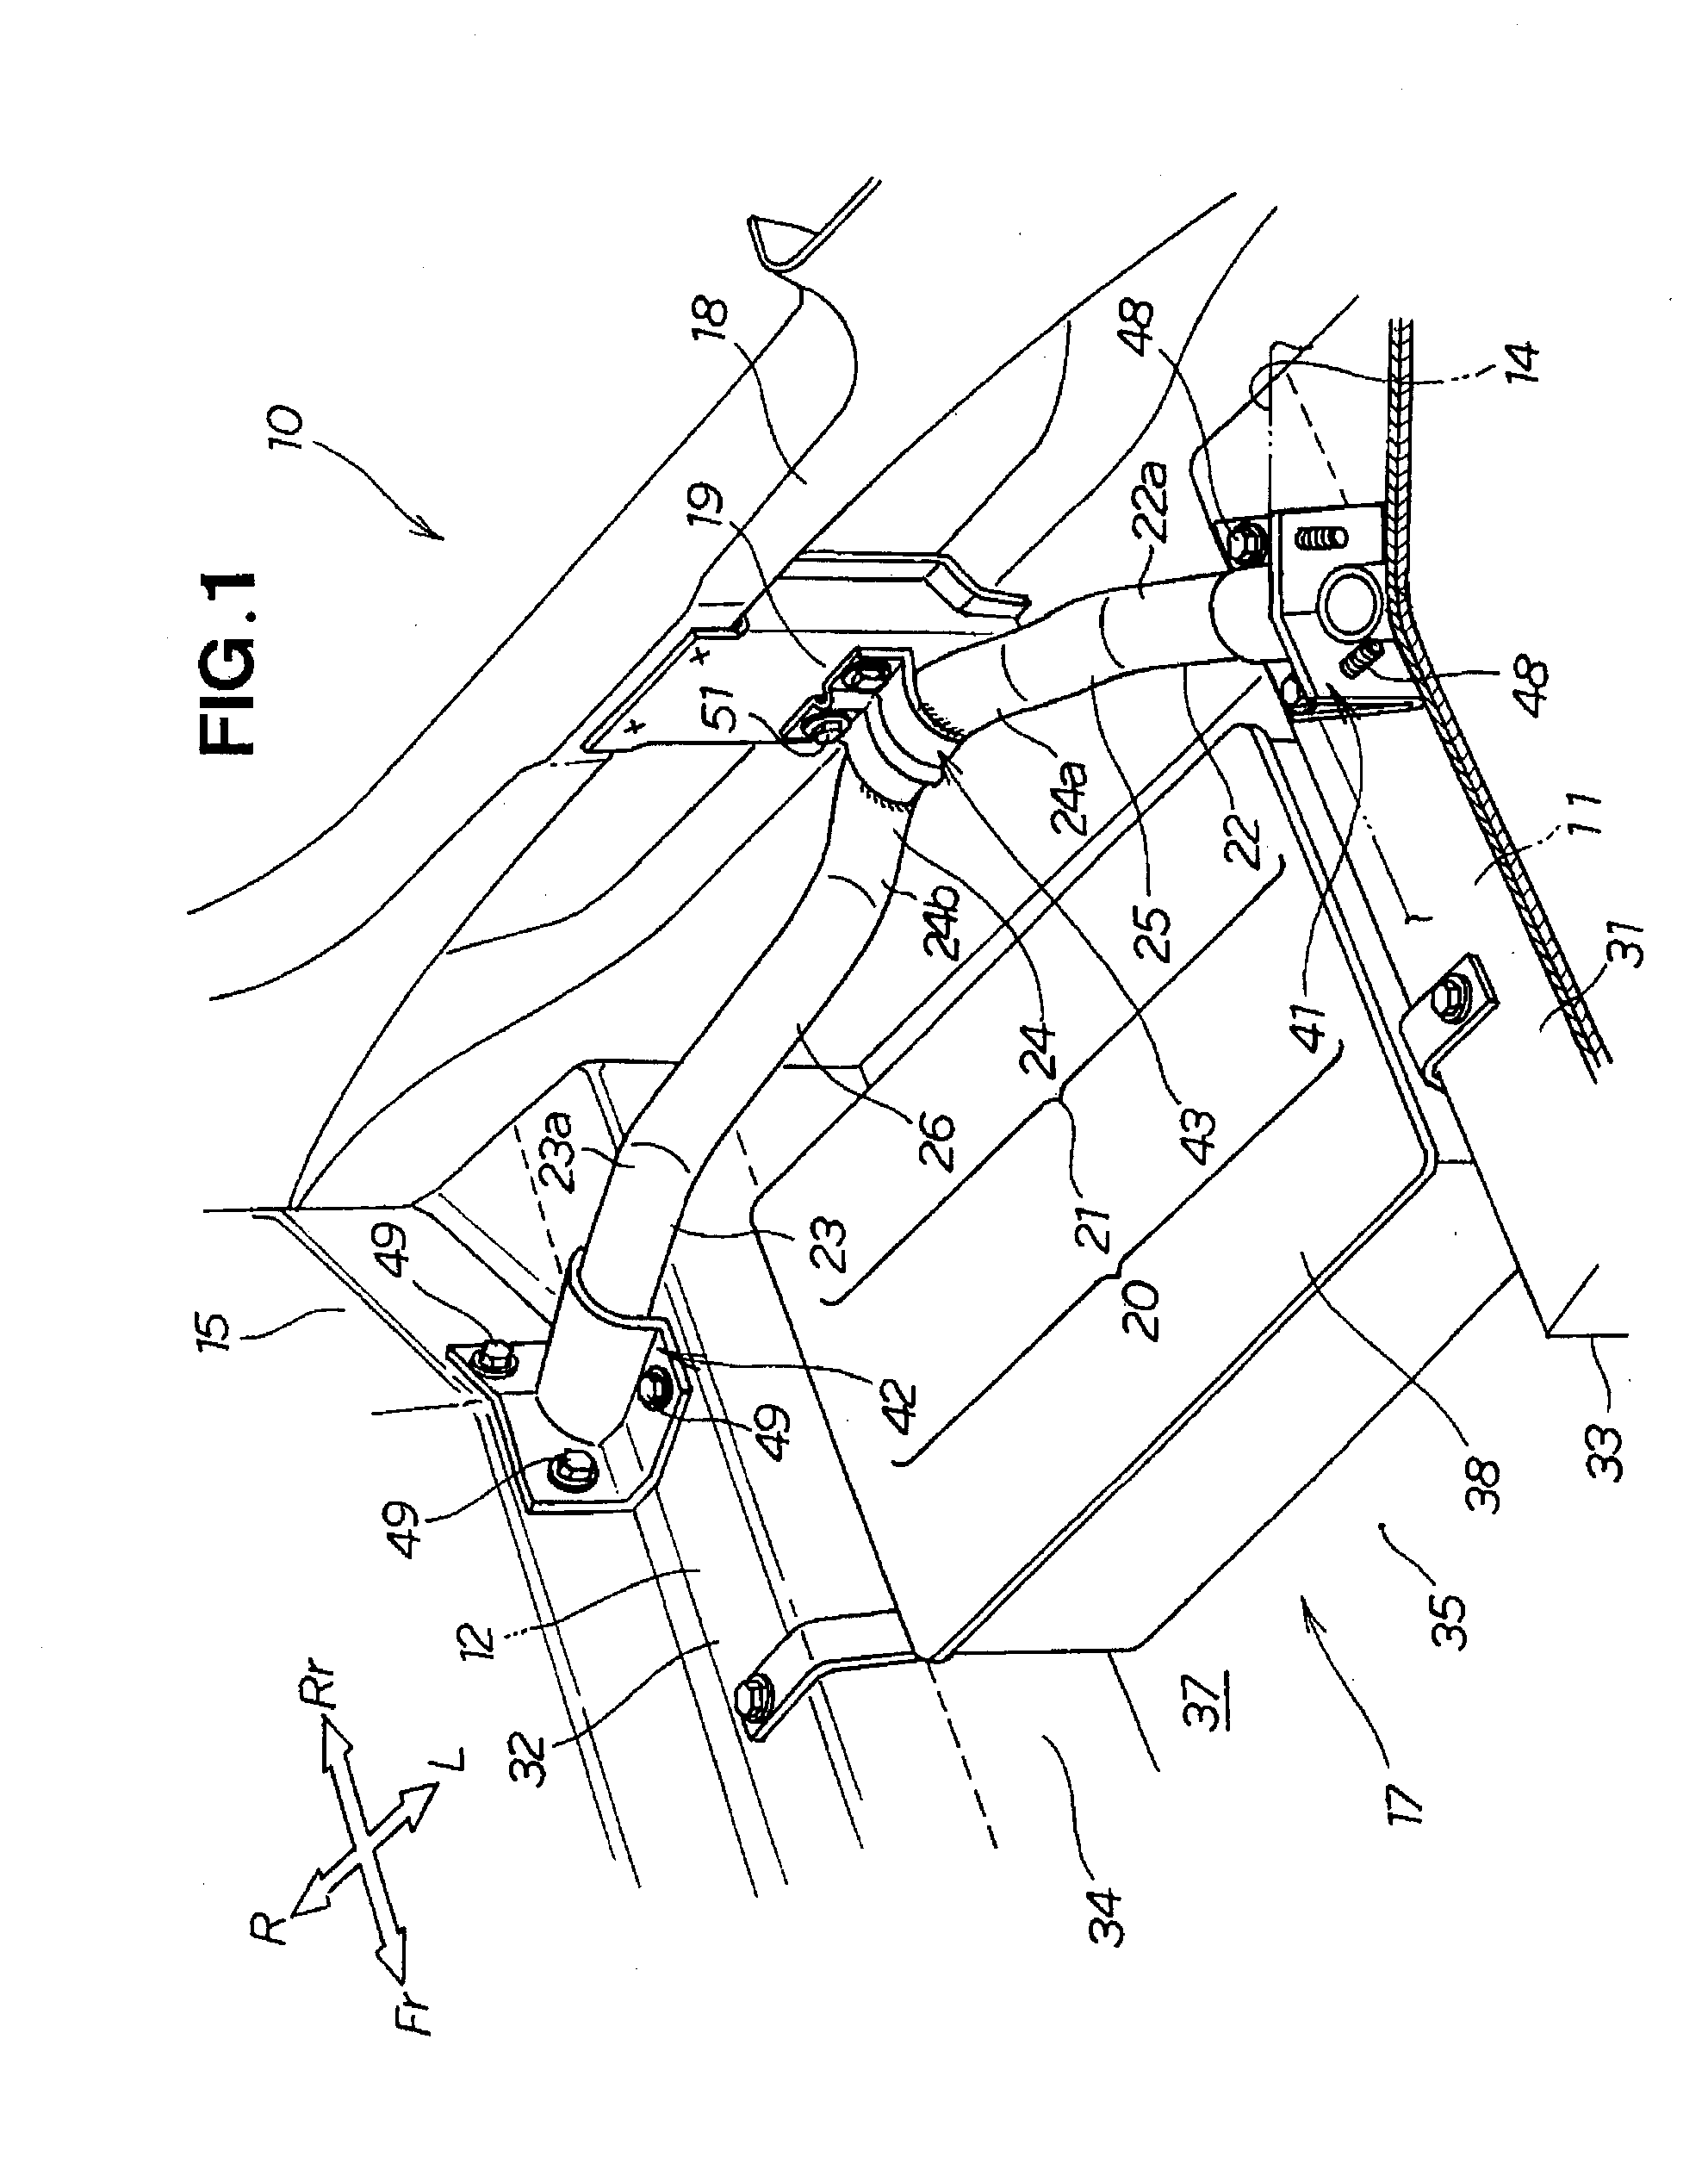 Rear frame structure for vehicle